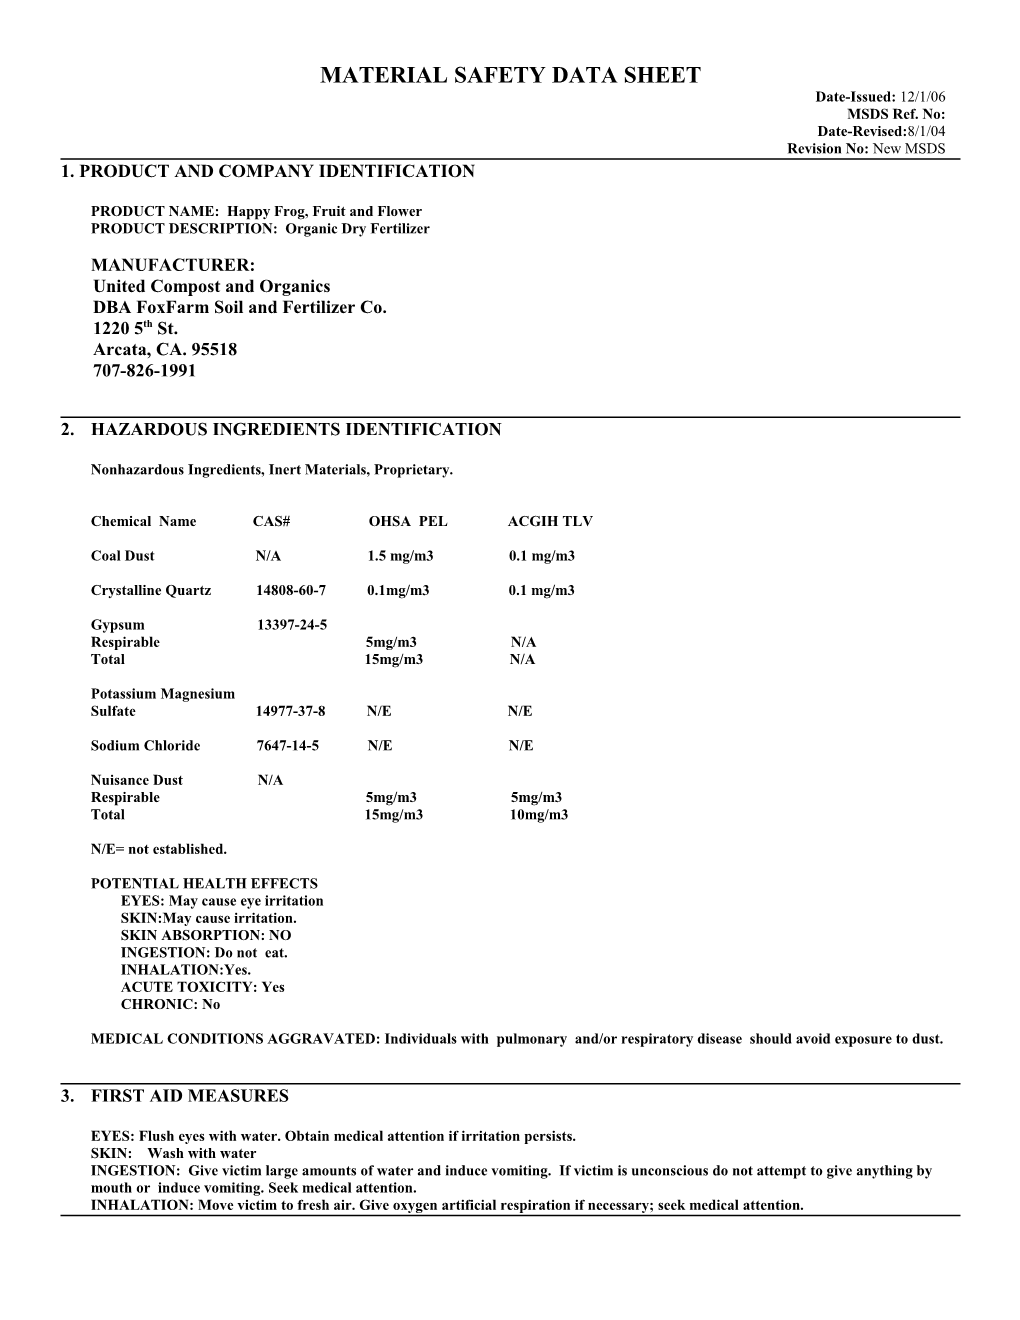 Material Safety Data Sheet s134